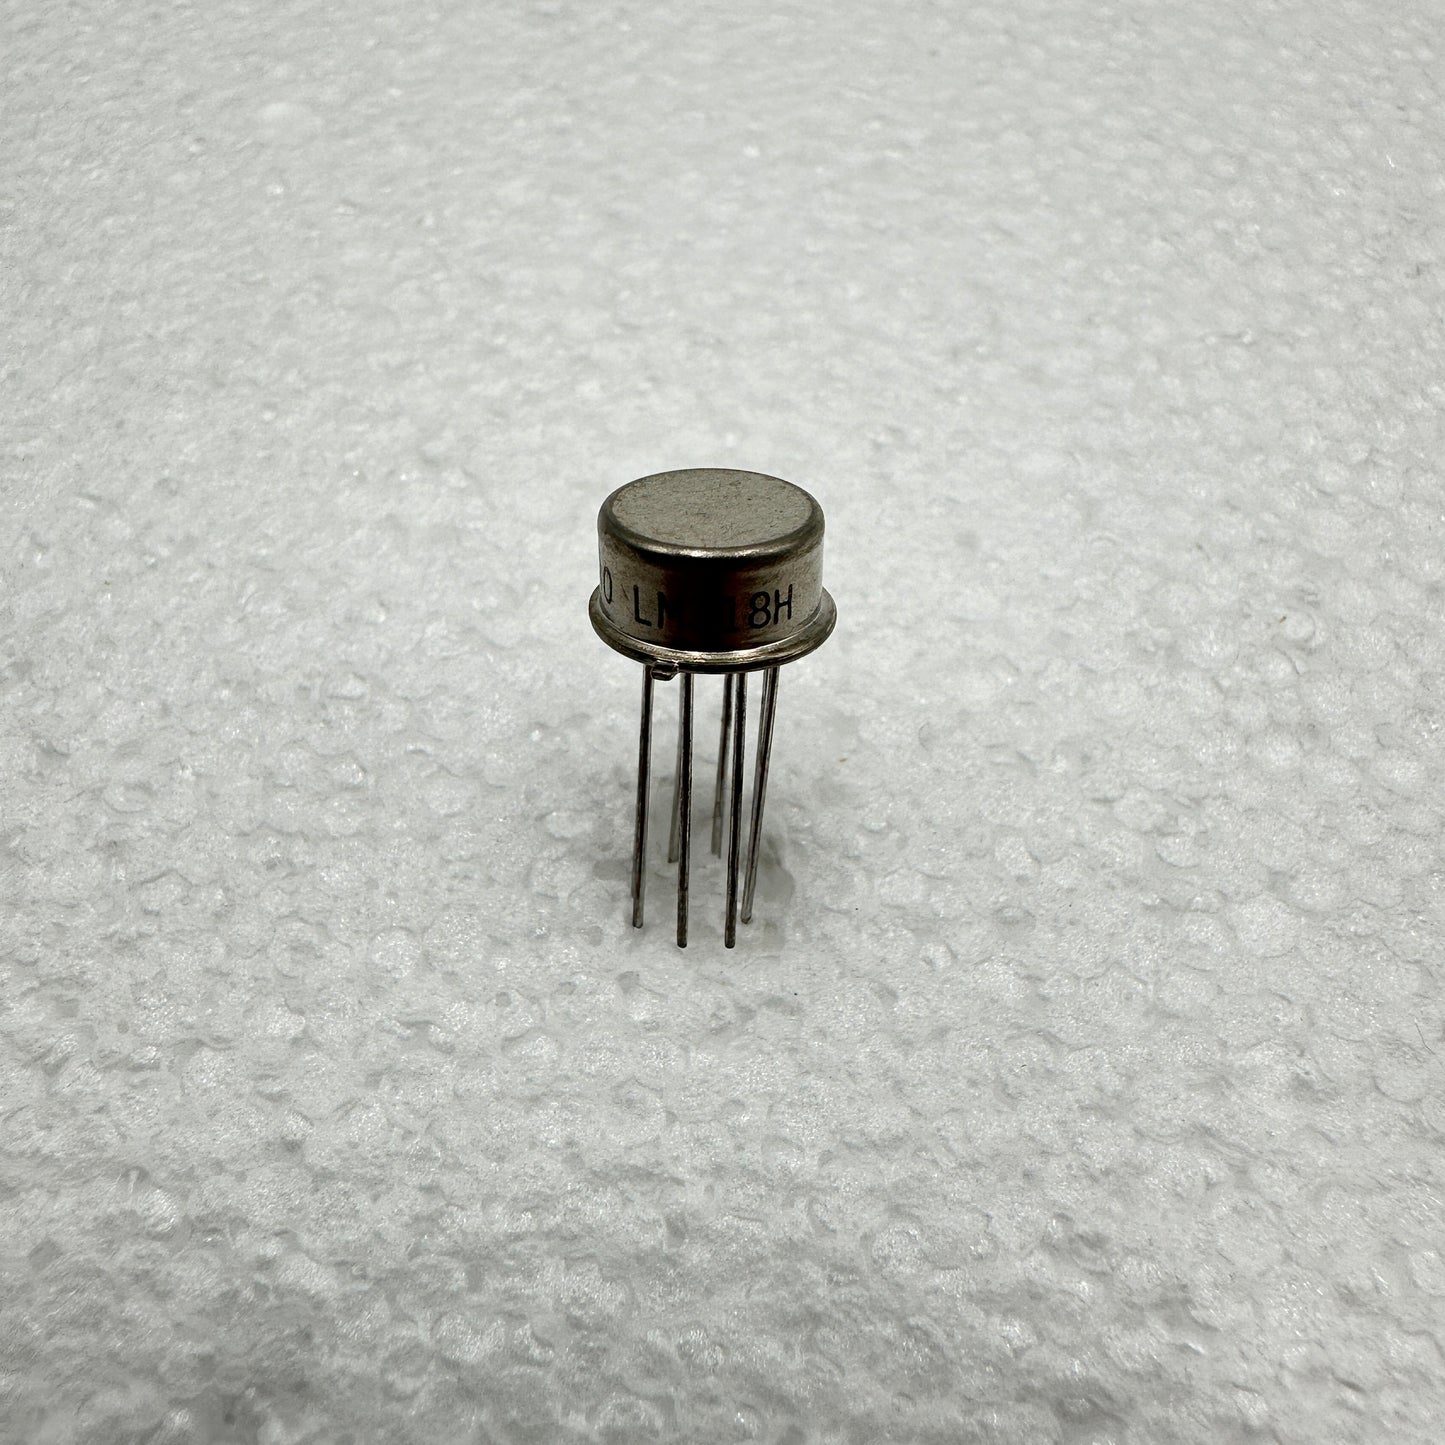 LM318H SS Single Op-Amp TO-99 Metal Can LM 318